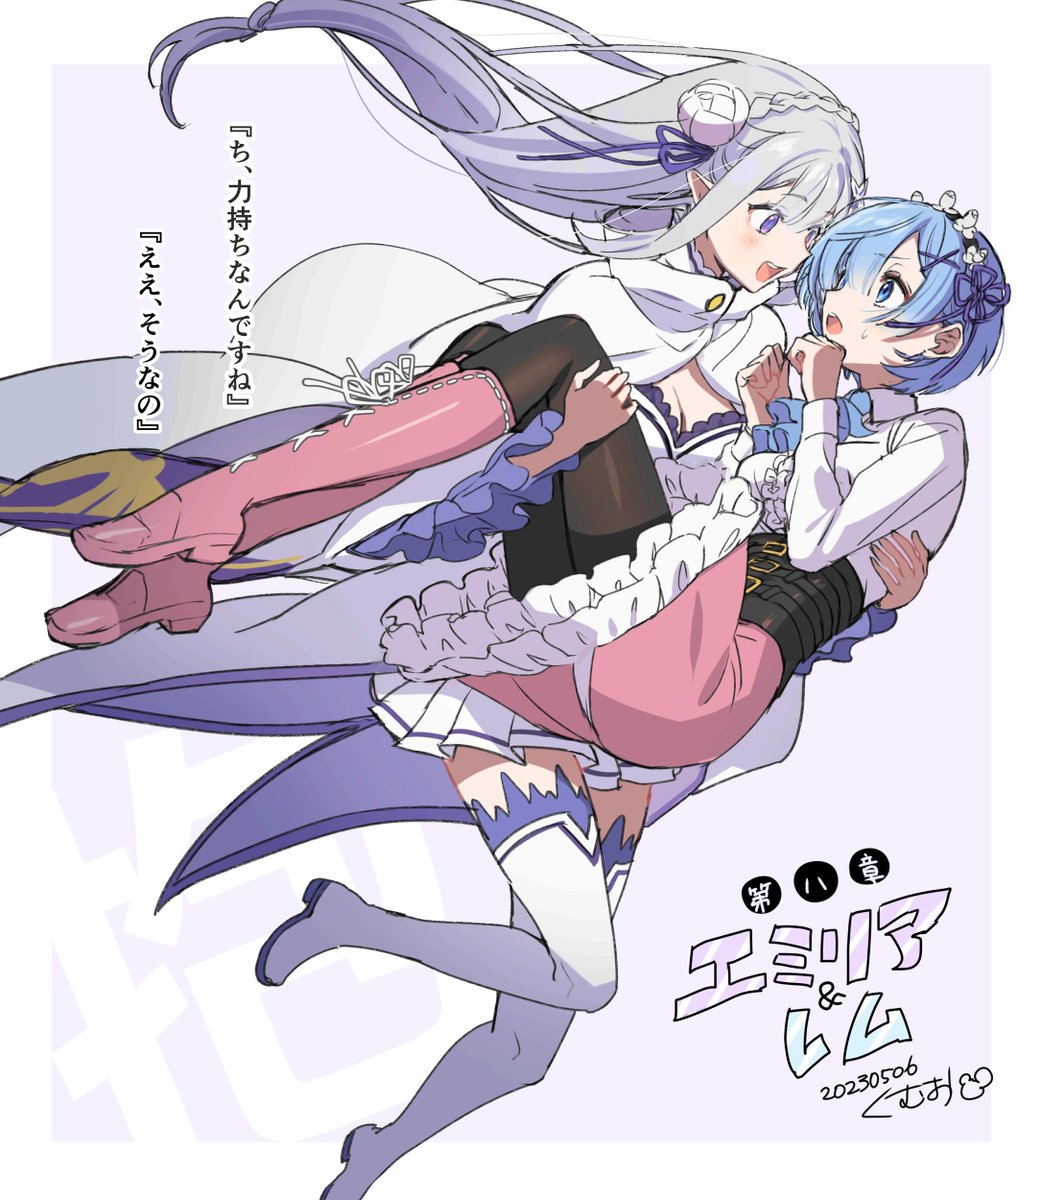 Re Zero Arc 8 Chapter 16 Arc 8, Chapter 8 – “Future Prospects” | Witch Cult Translations